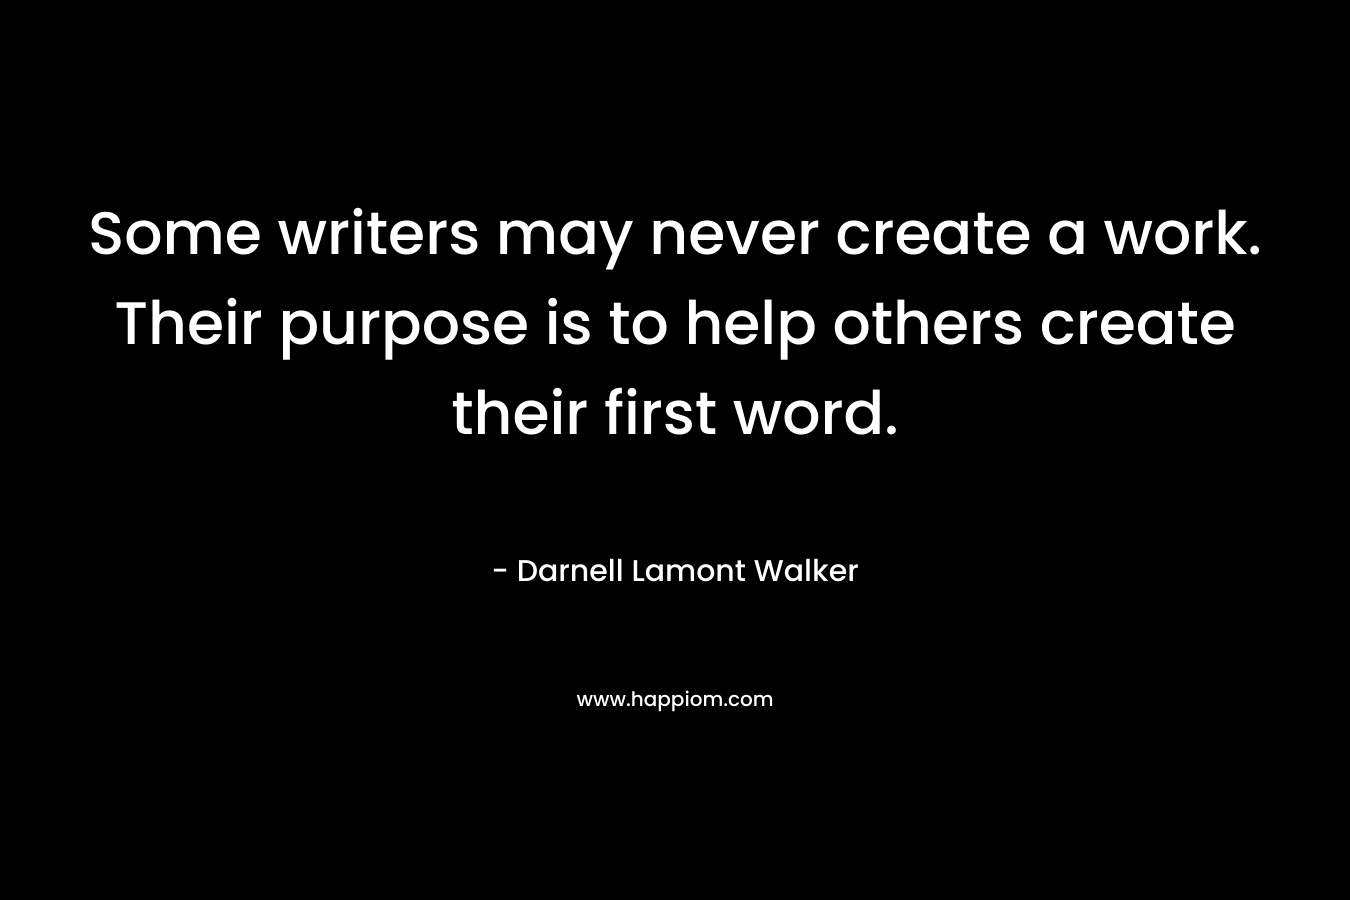 Some writers may never create a work. Their purpose is to help others create their first word.